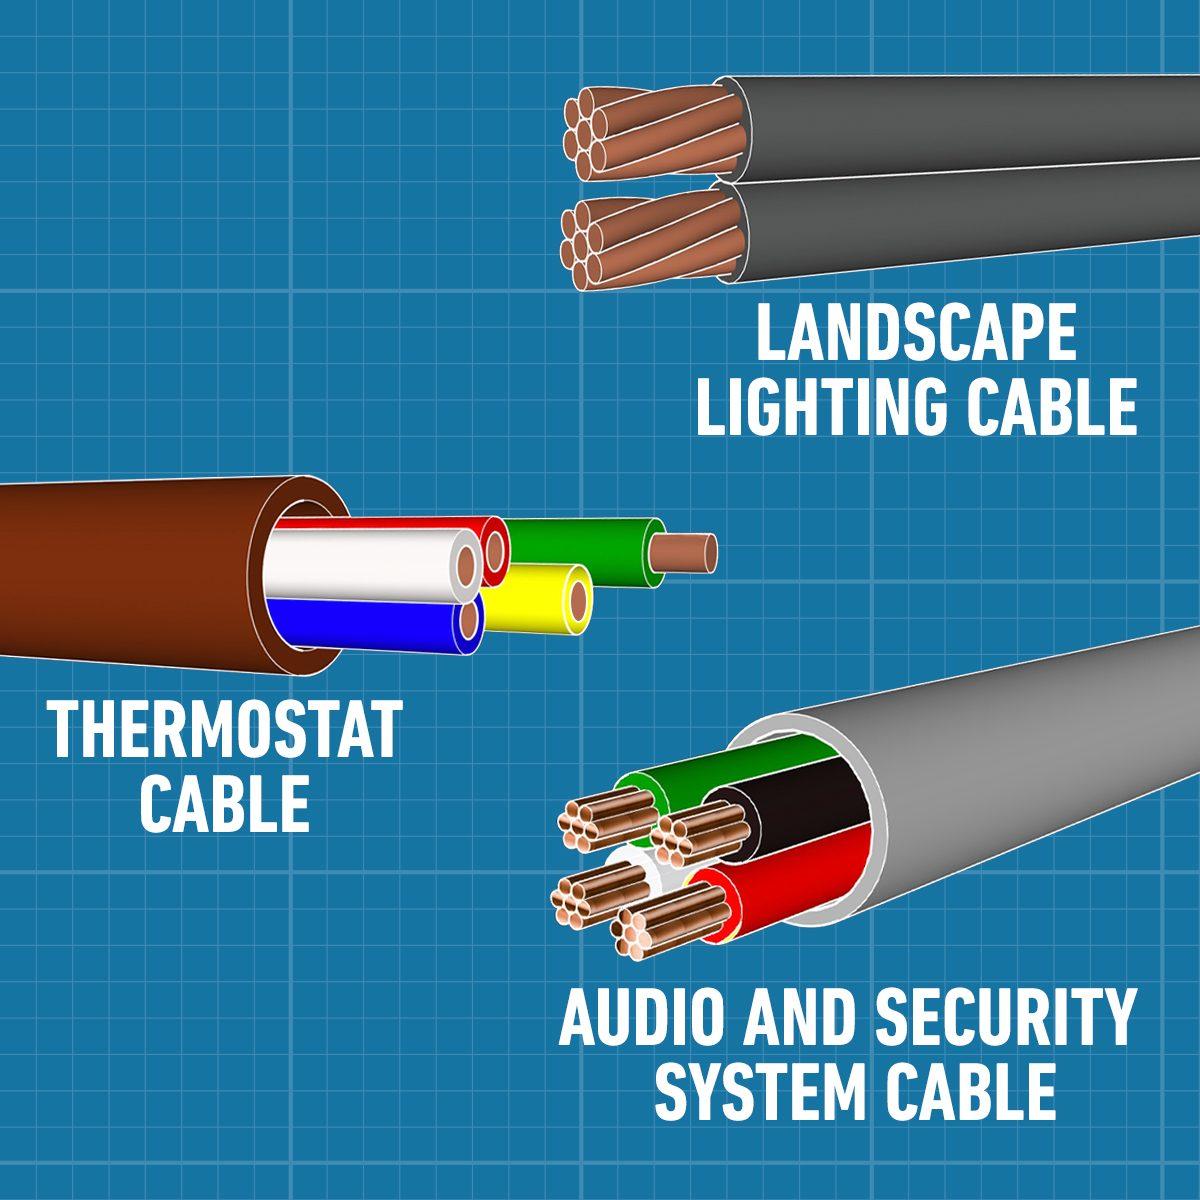 8 Most Common Electrical Wires: Uses, Definitions, and More